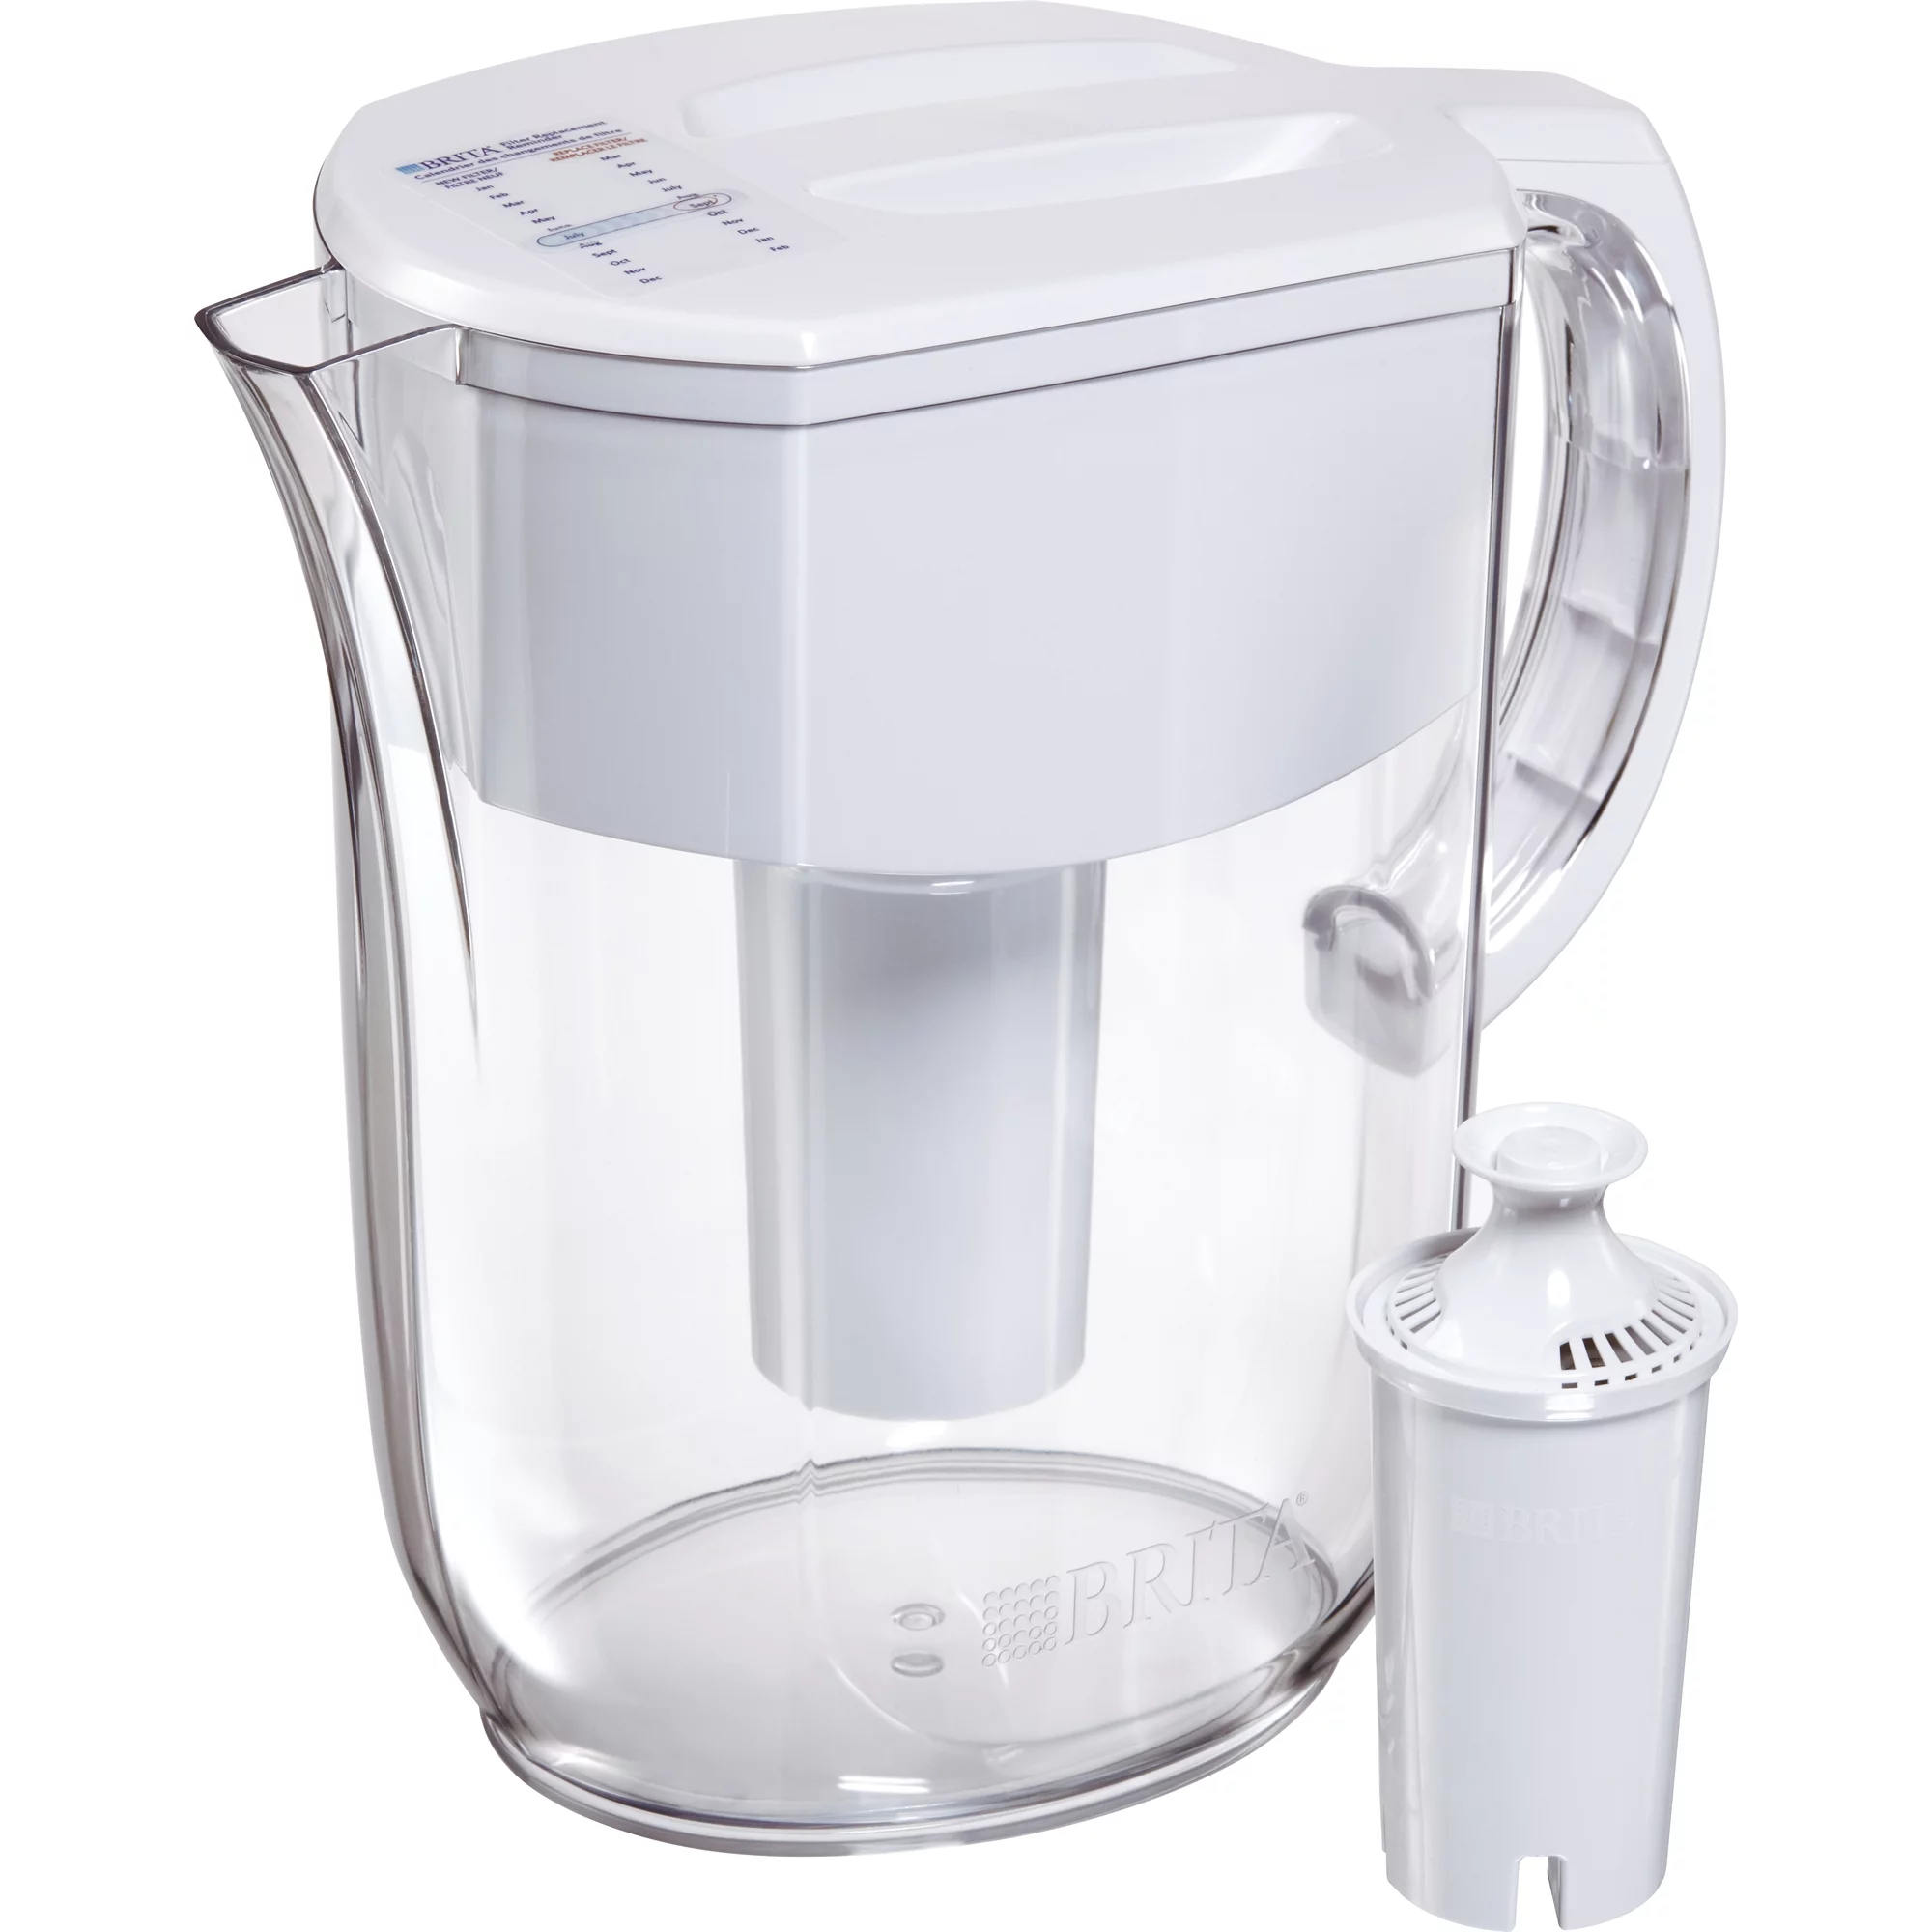 Brita Everyday Water Filter Pitcher with Filter, 10 Cup - White